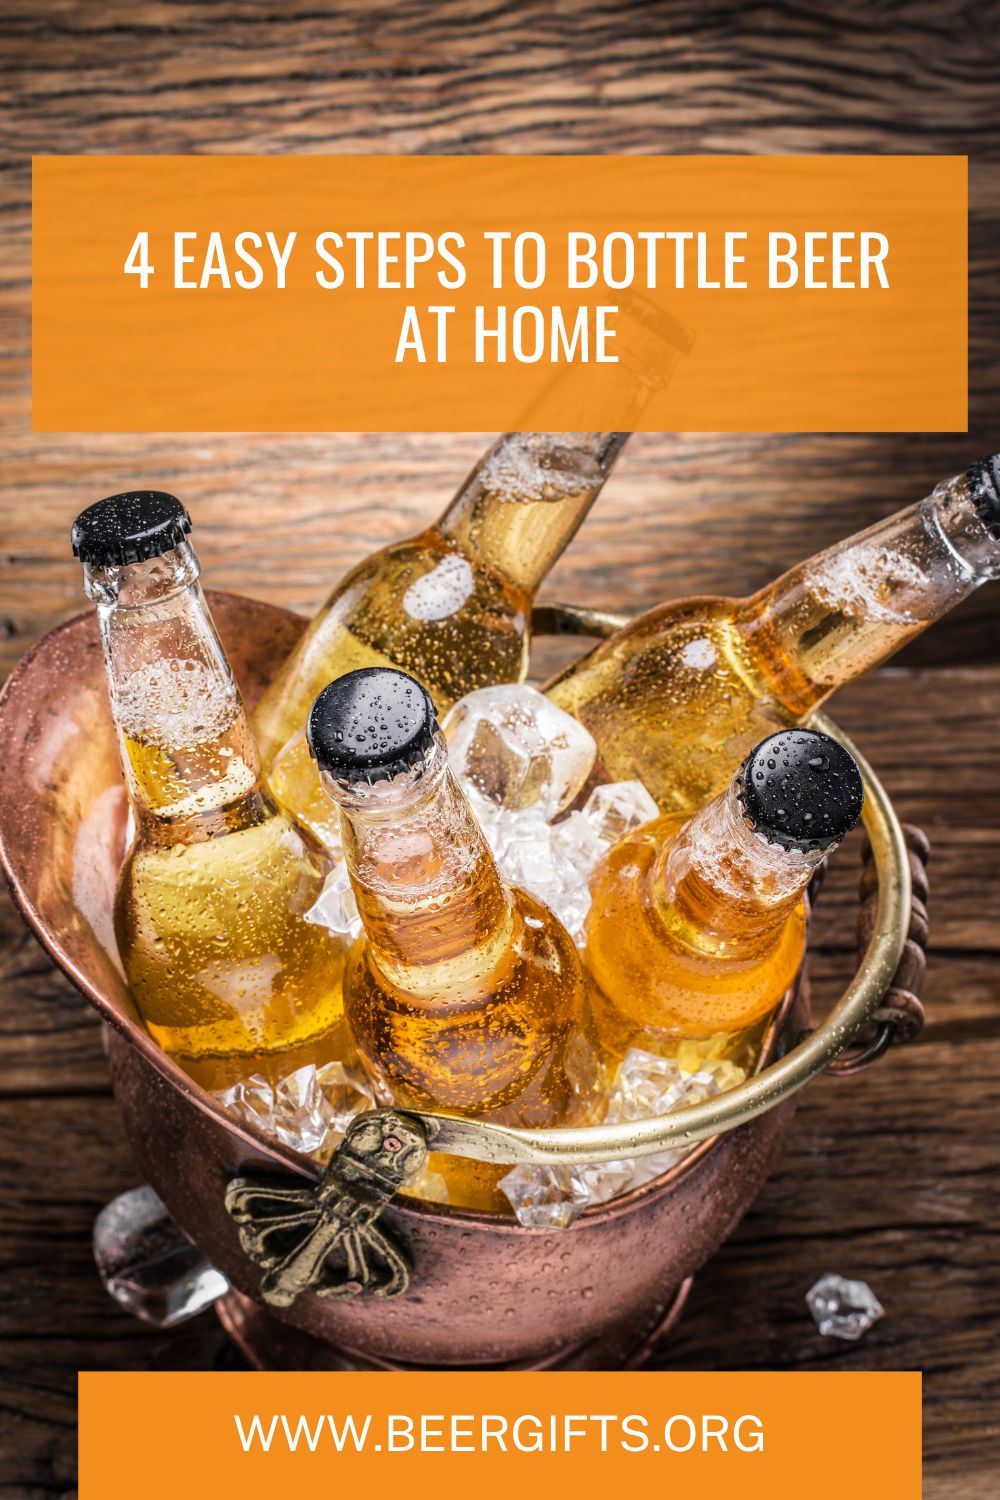 4 Easy Steps To Bottle Beer At Home10